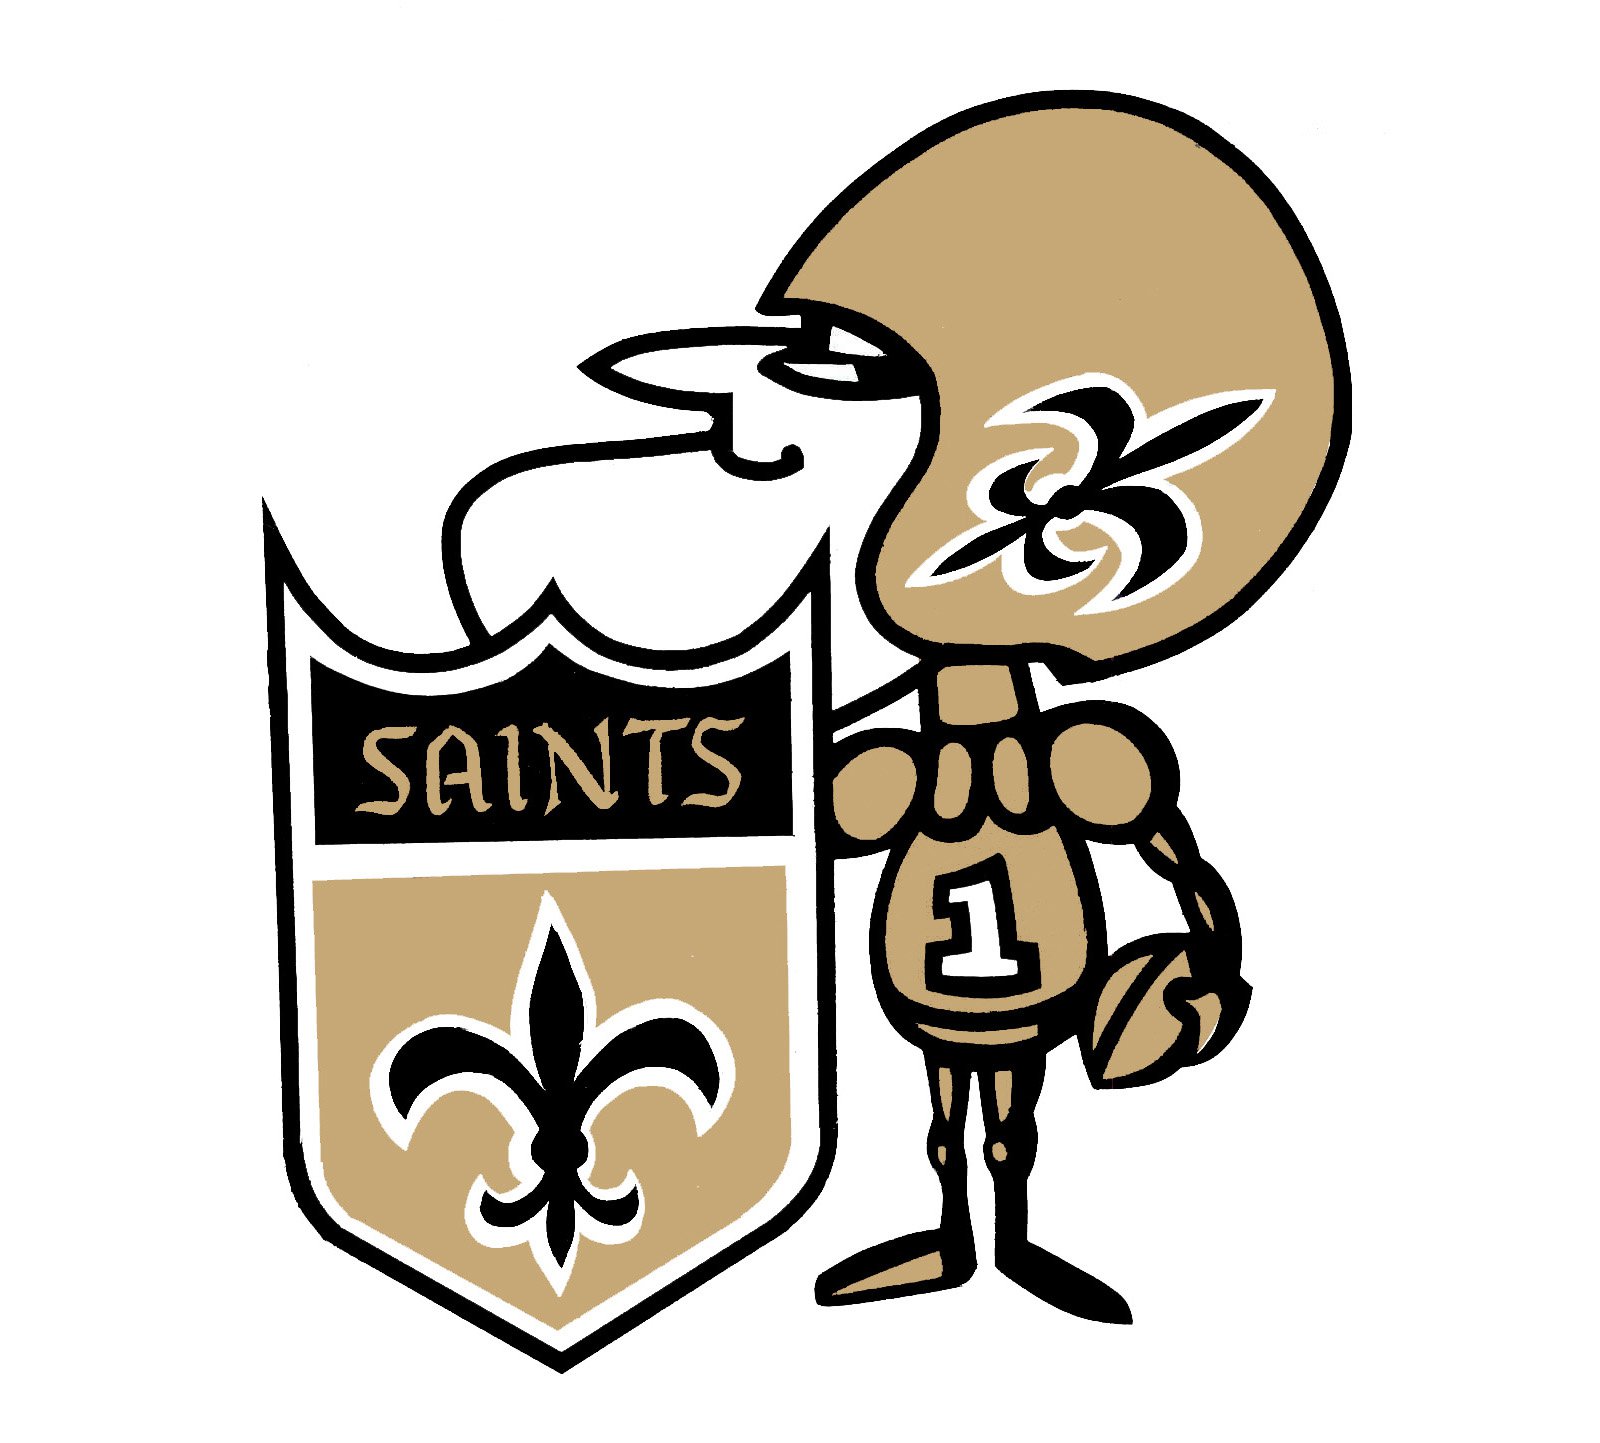 Meaning New Orleans Saints logo and symbol.